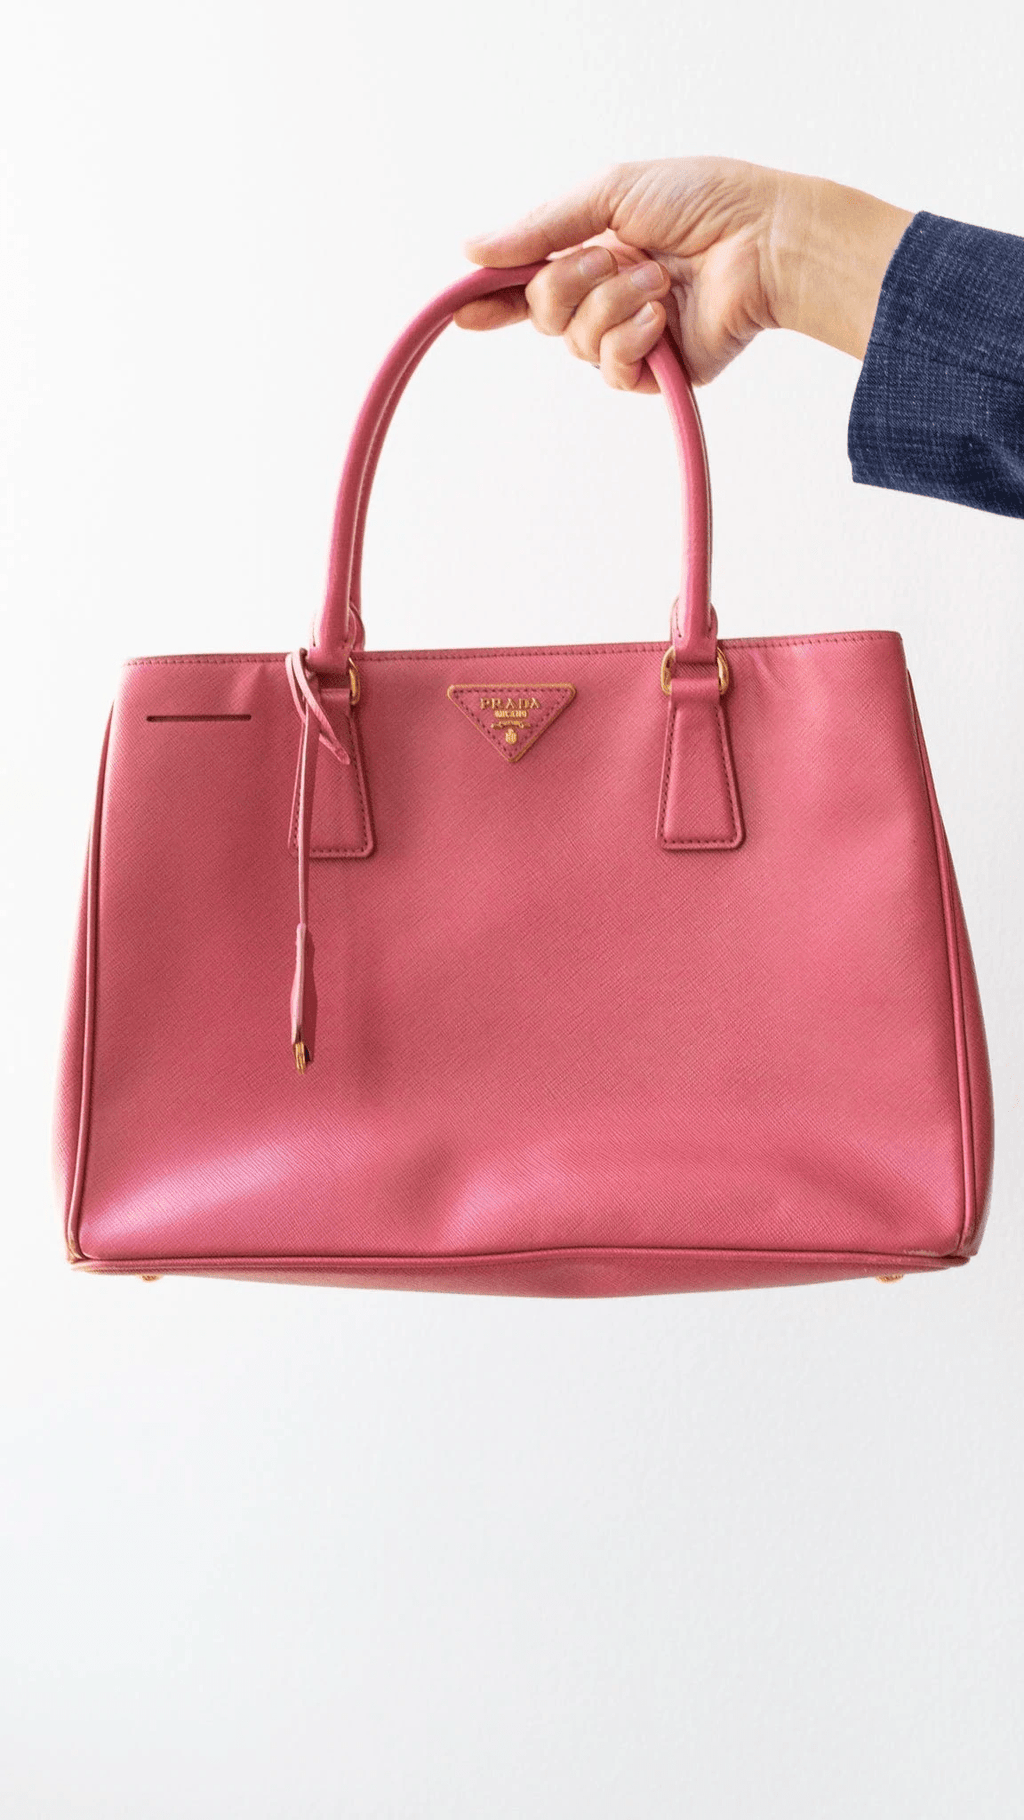 Prada Hand Bag Galleria Double Zip Pink Saffiano Leather Small Tote Auth